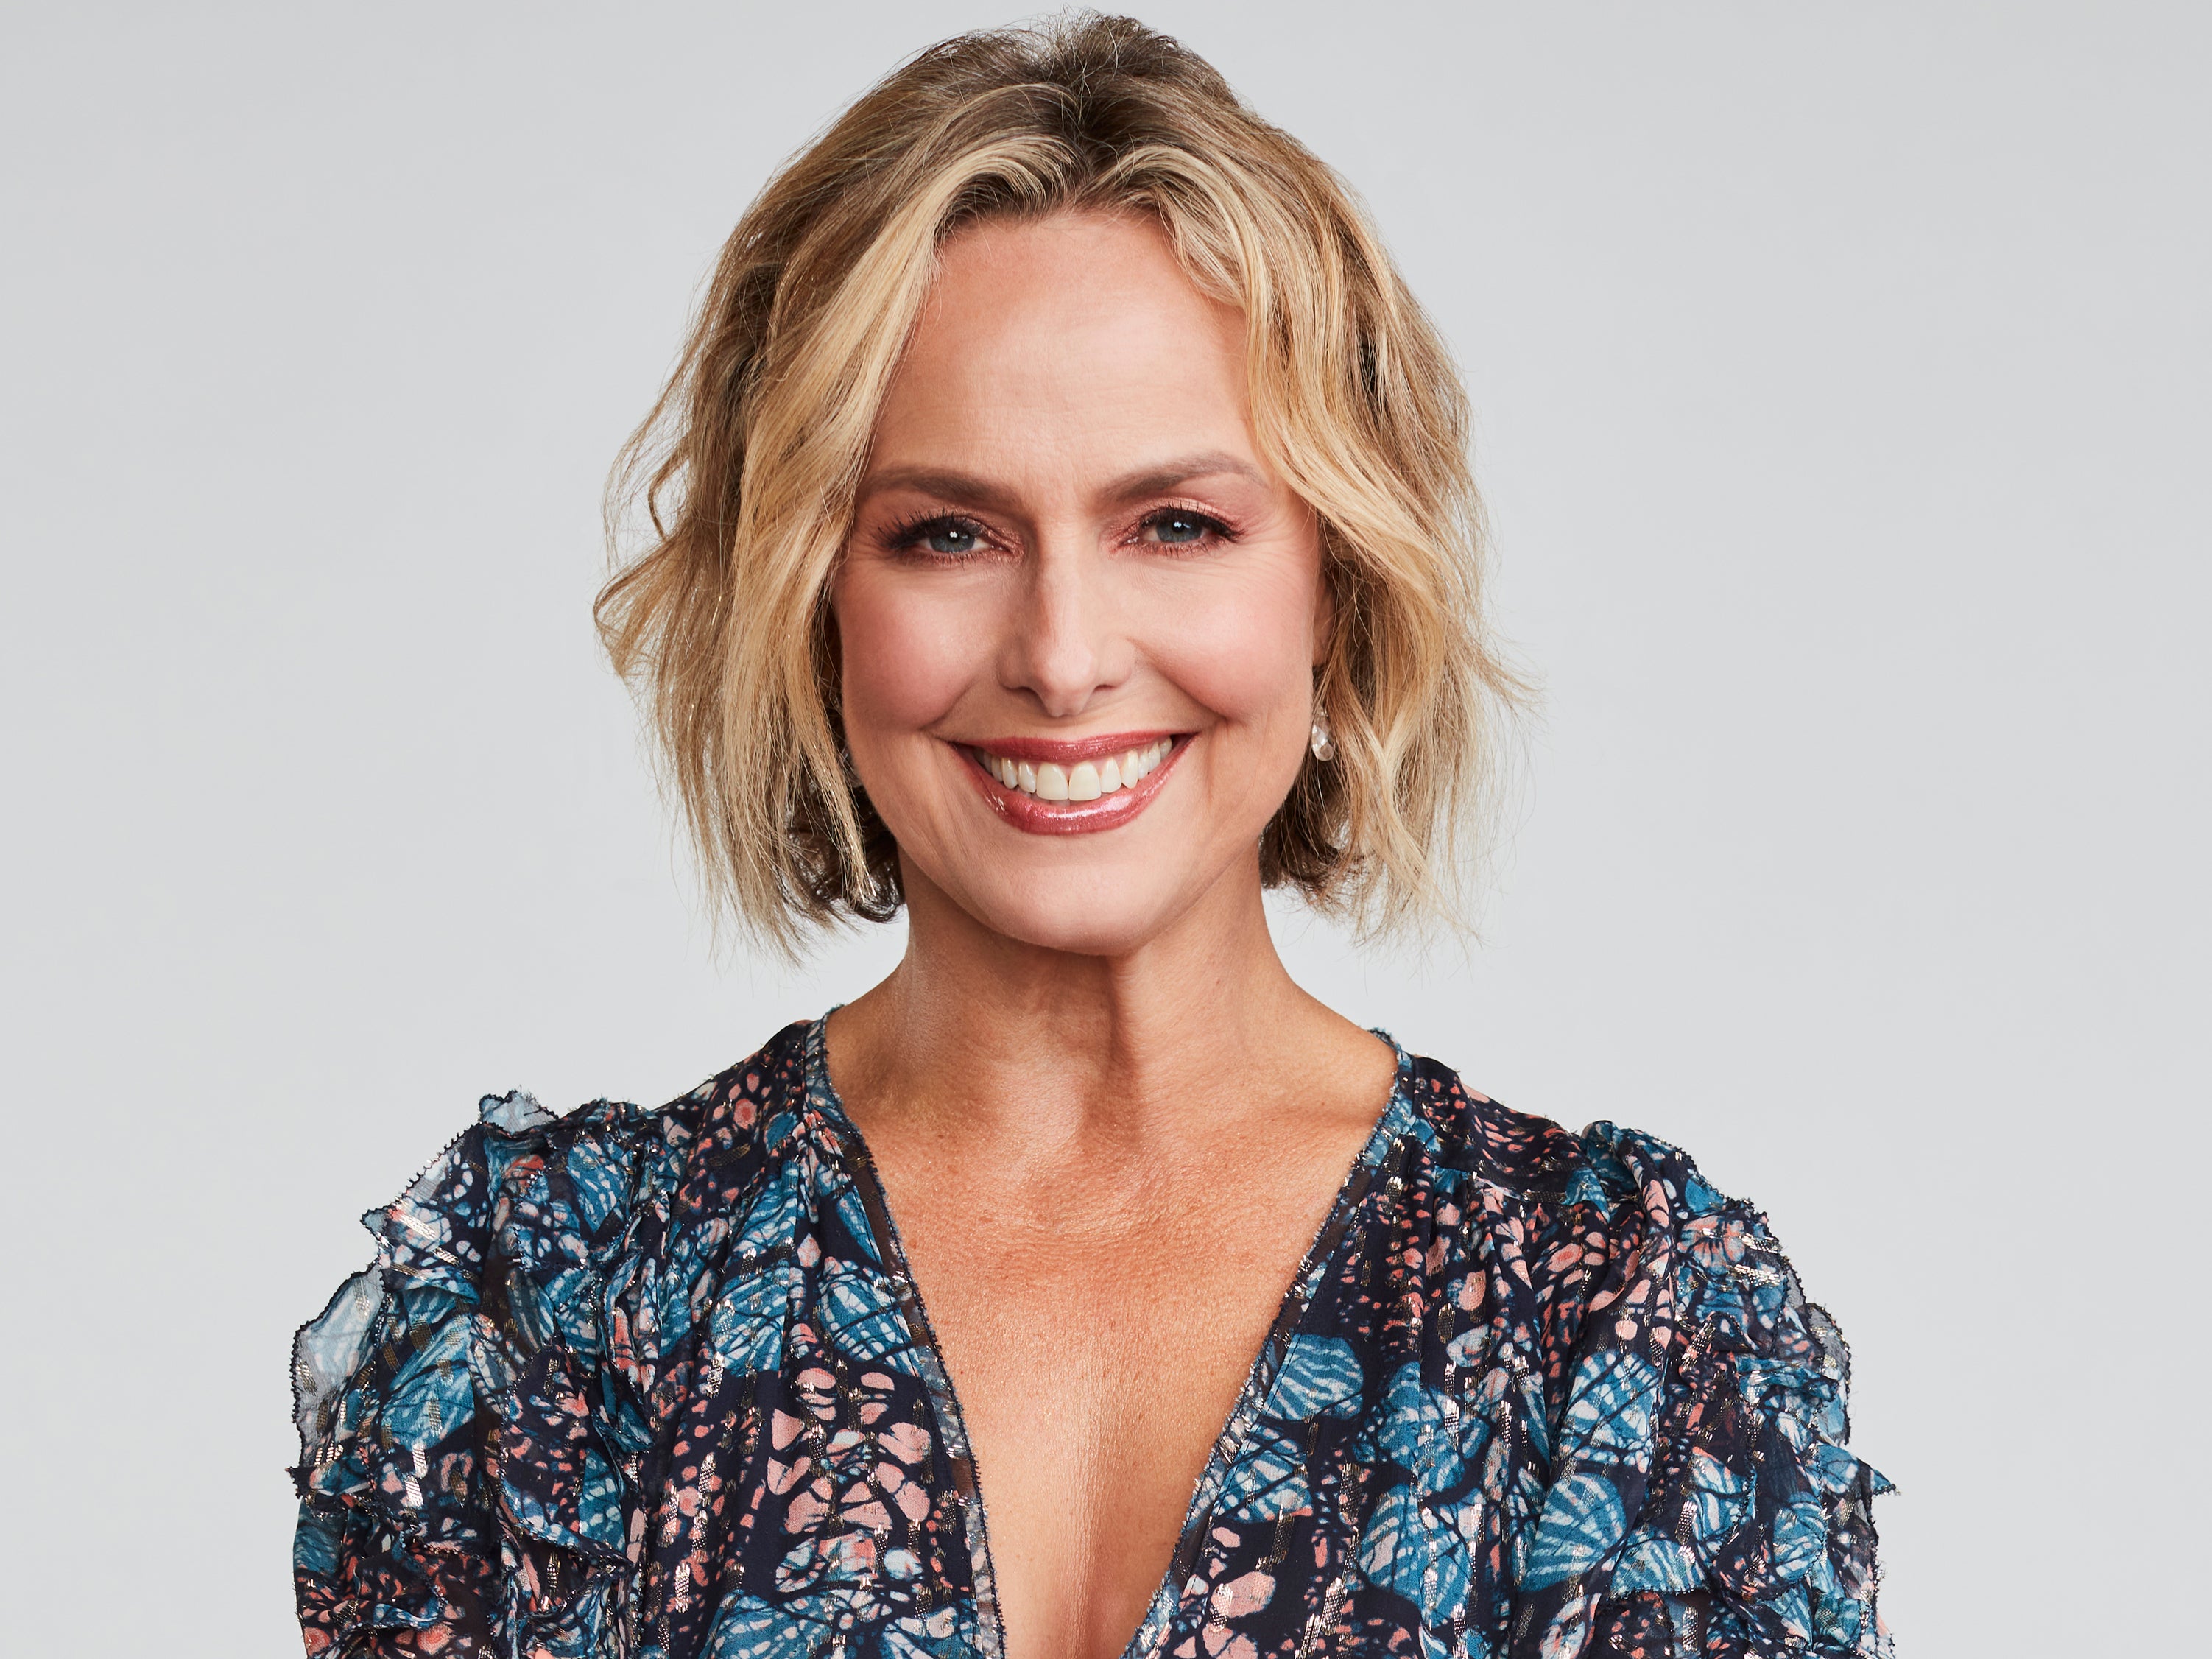 Melora Hardin will compete on ‘Dancing With The Stars’